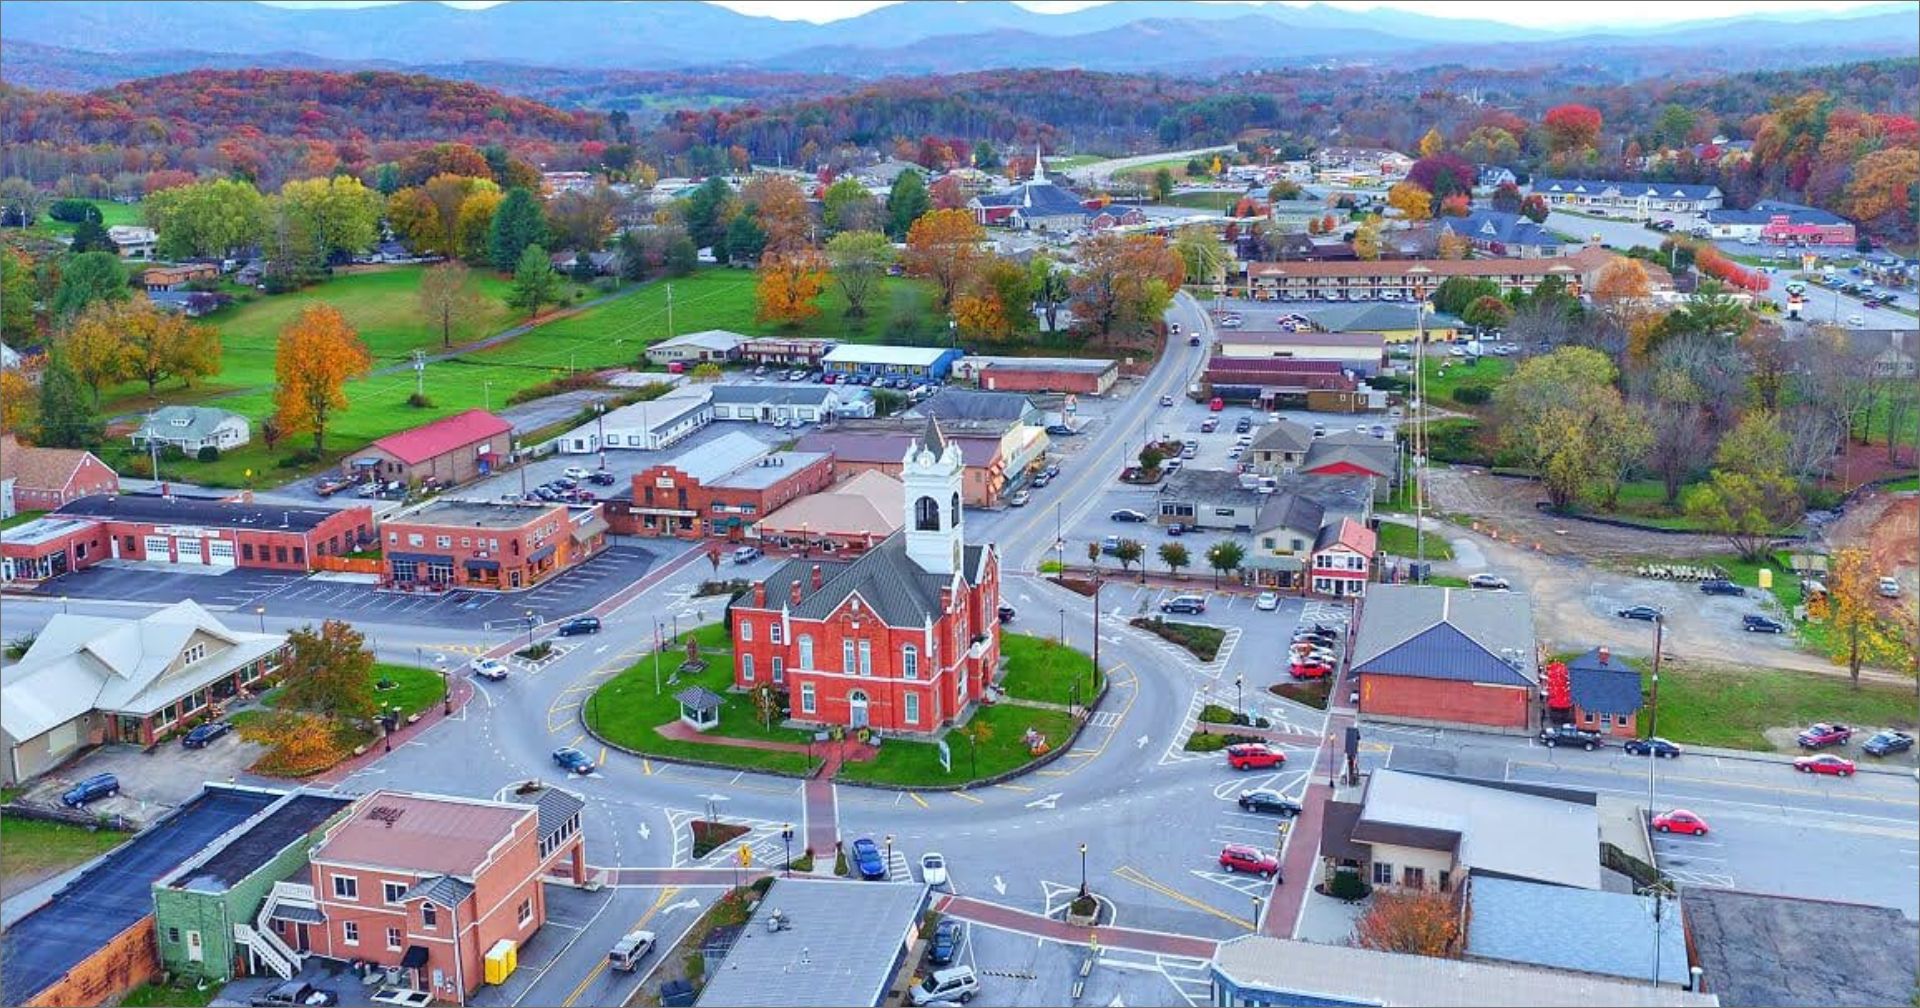 City of Blairsville  Government Agencies/Offices - One-of-a-kind